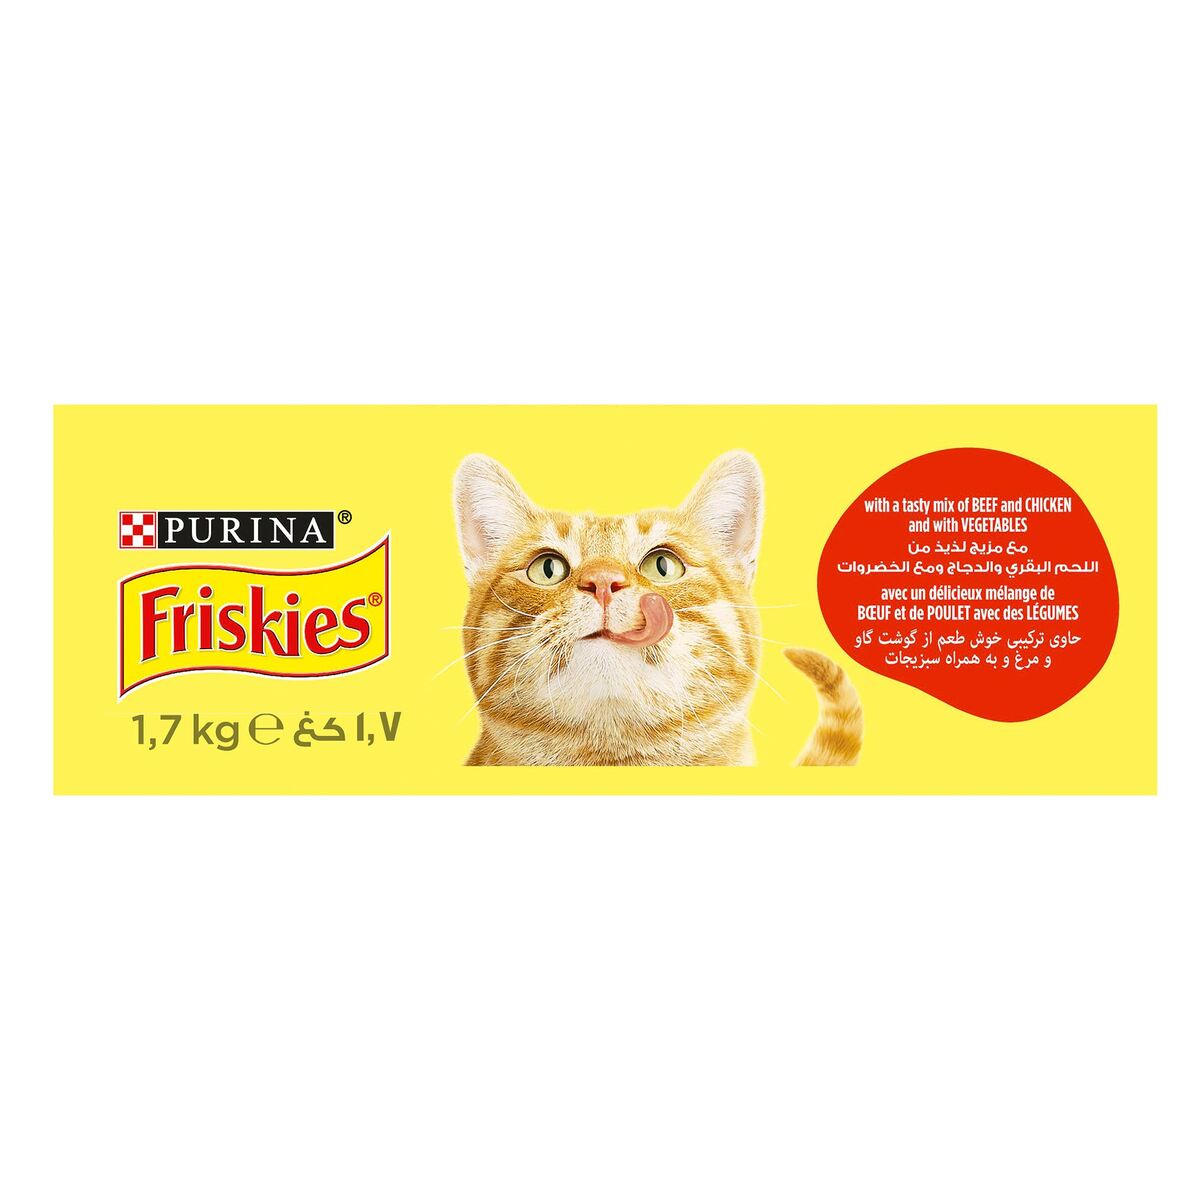 Purina Friskies Cat Food With Beef, Chicken & Vegetables 1.7 kg